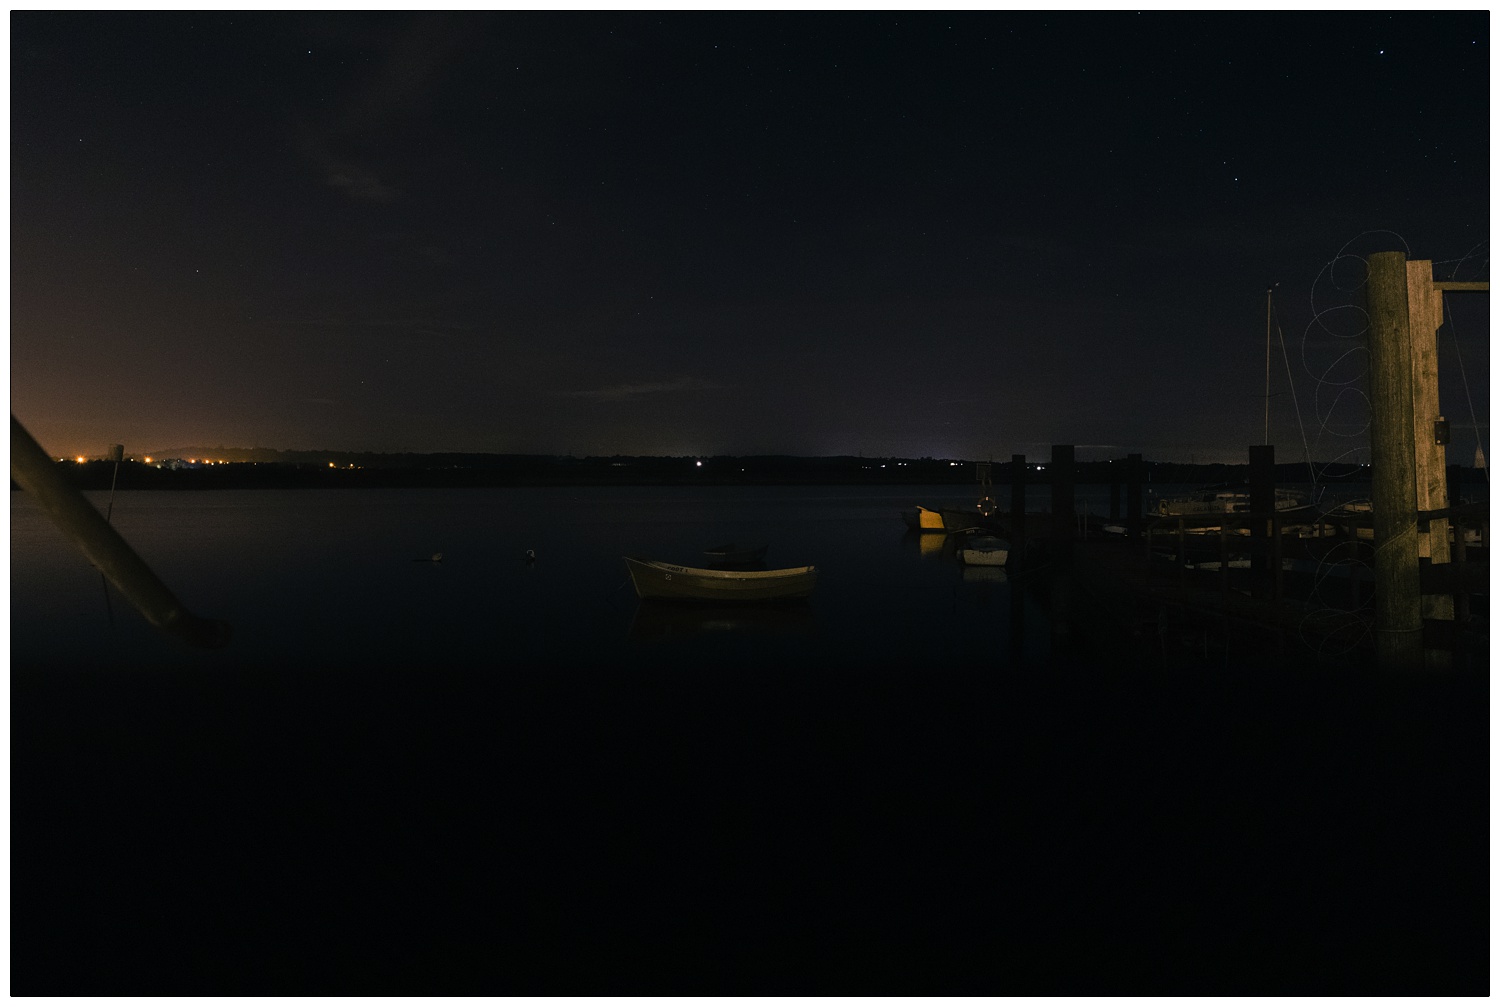 A boat on the River Crouch at night, outside the Brandy Hole in Hullbridge. You can see the stars in the sky and the glow of orange lights from South Woodham Ferrers across the river.